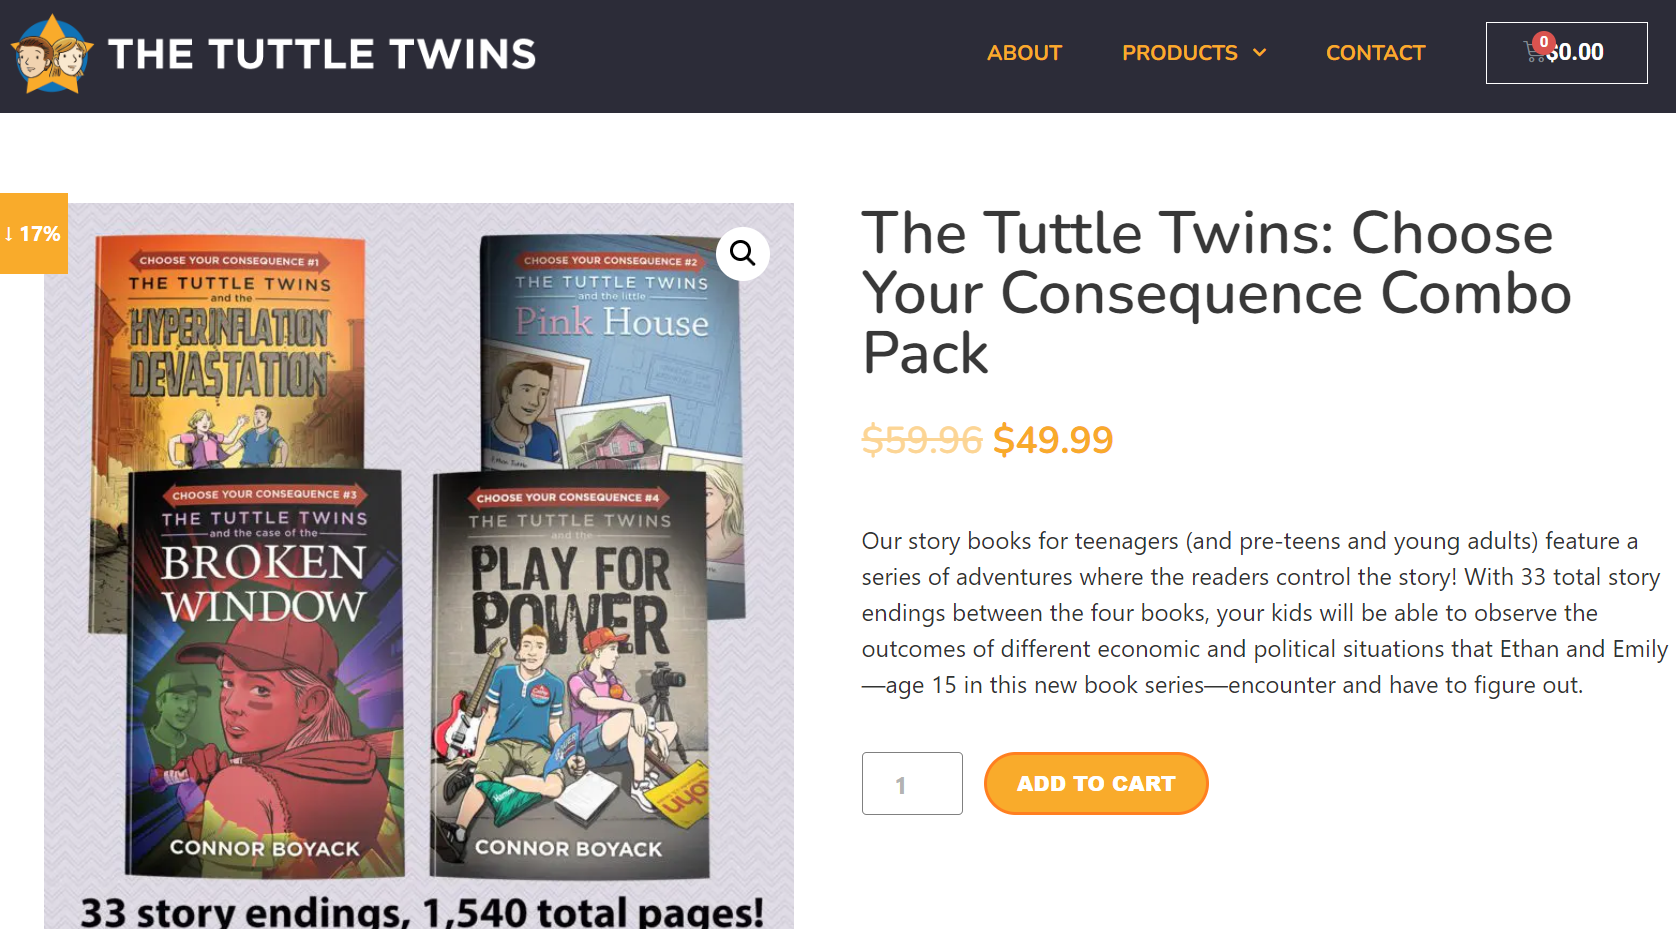 Offers to learn by Tuttle Twins